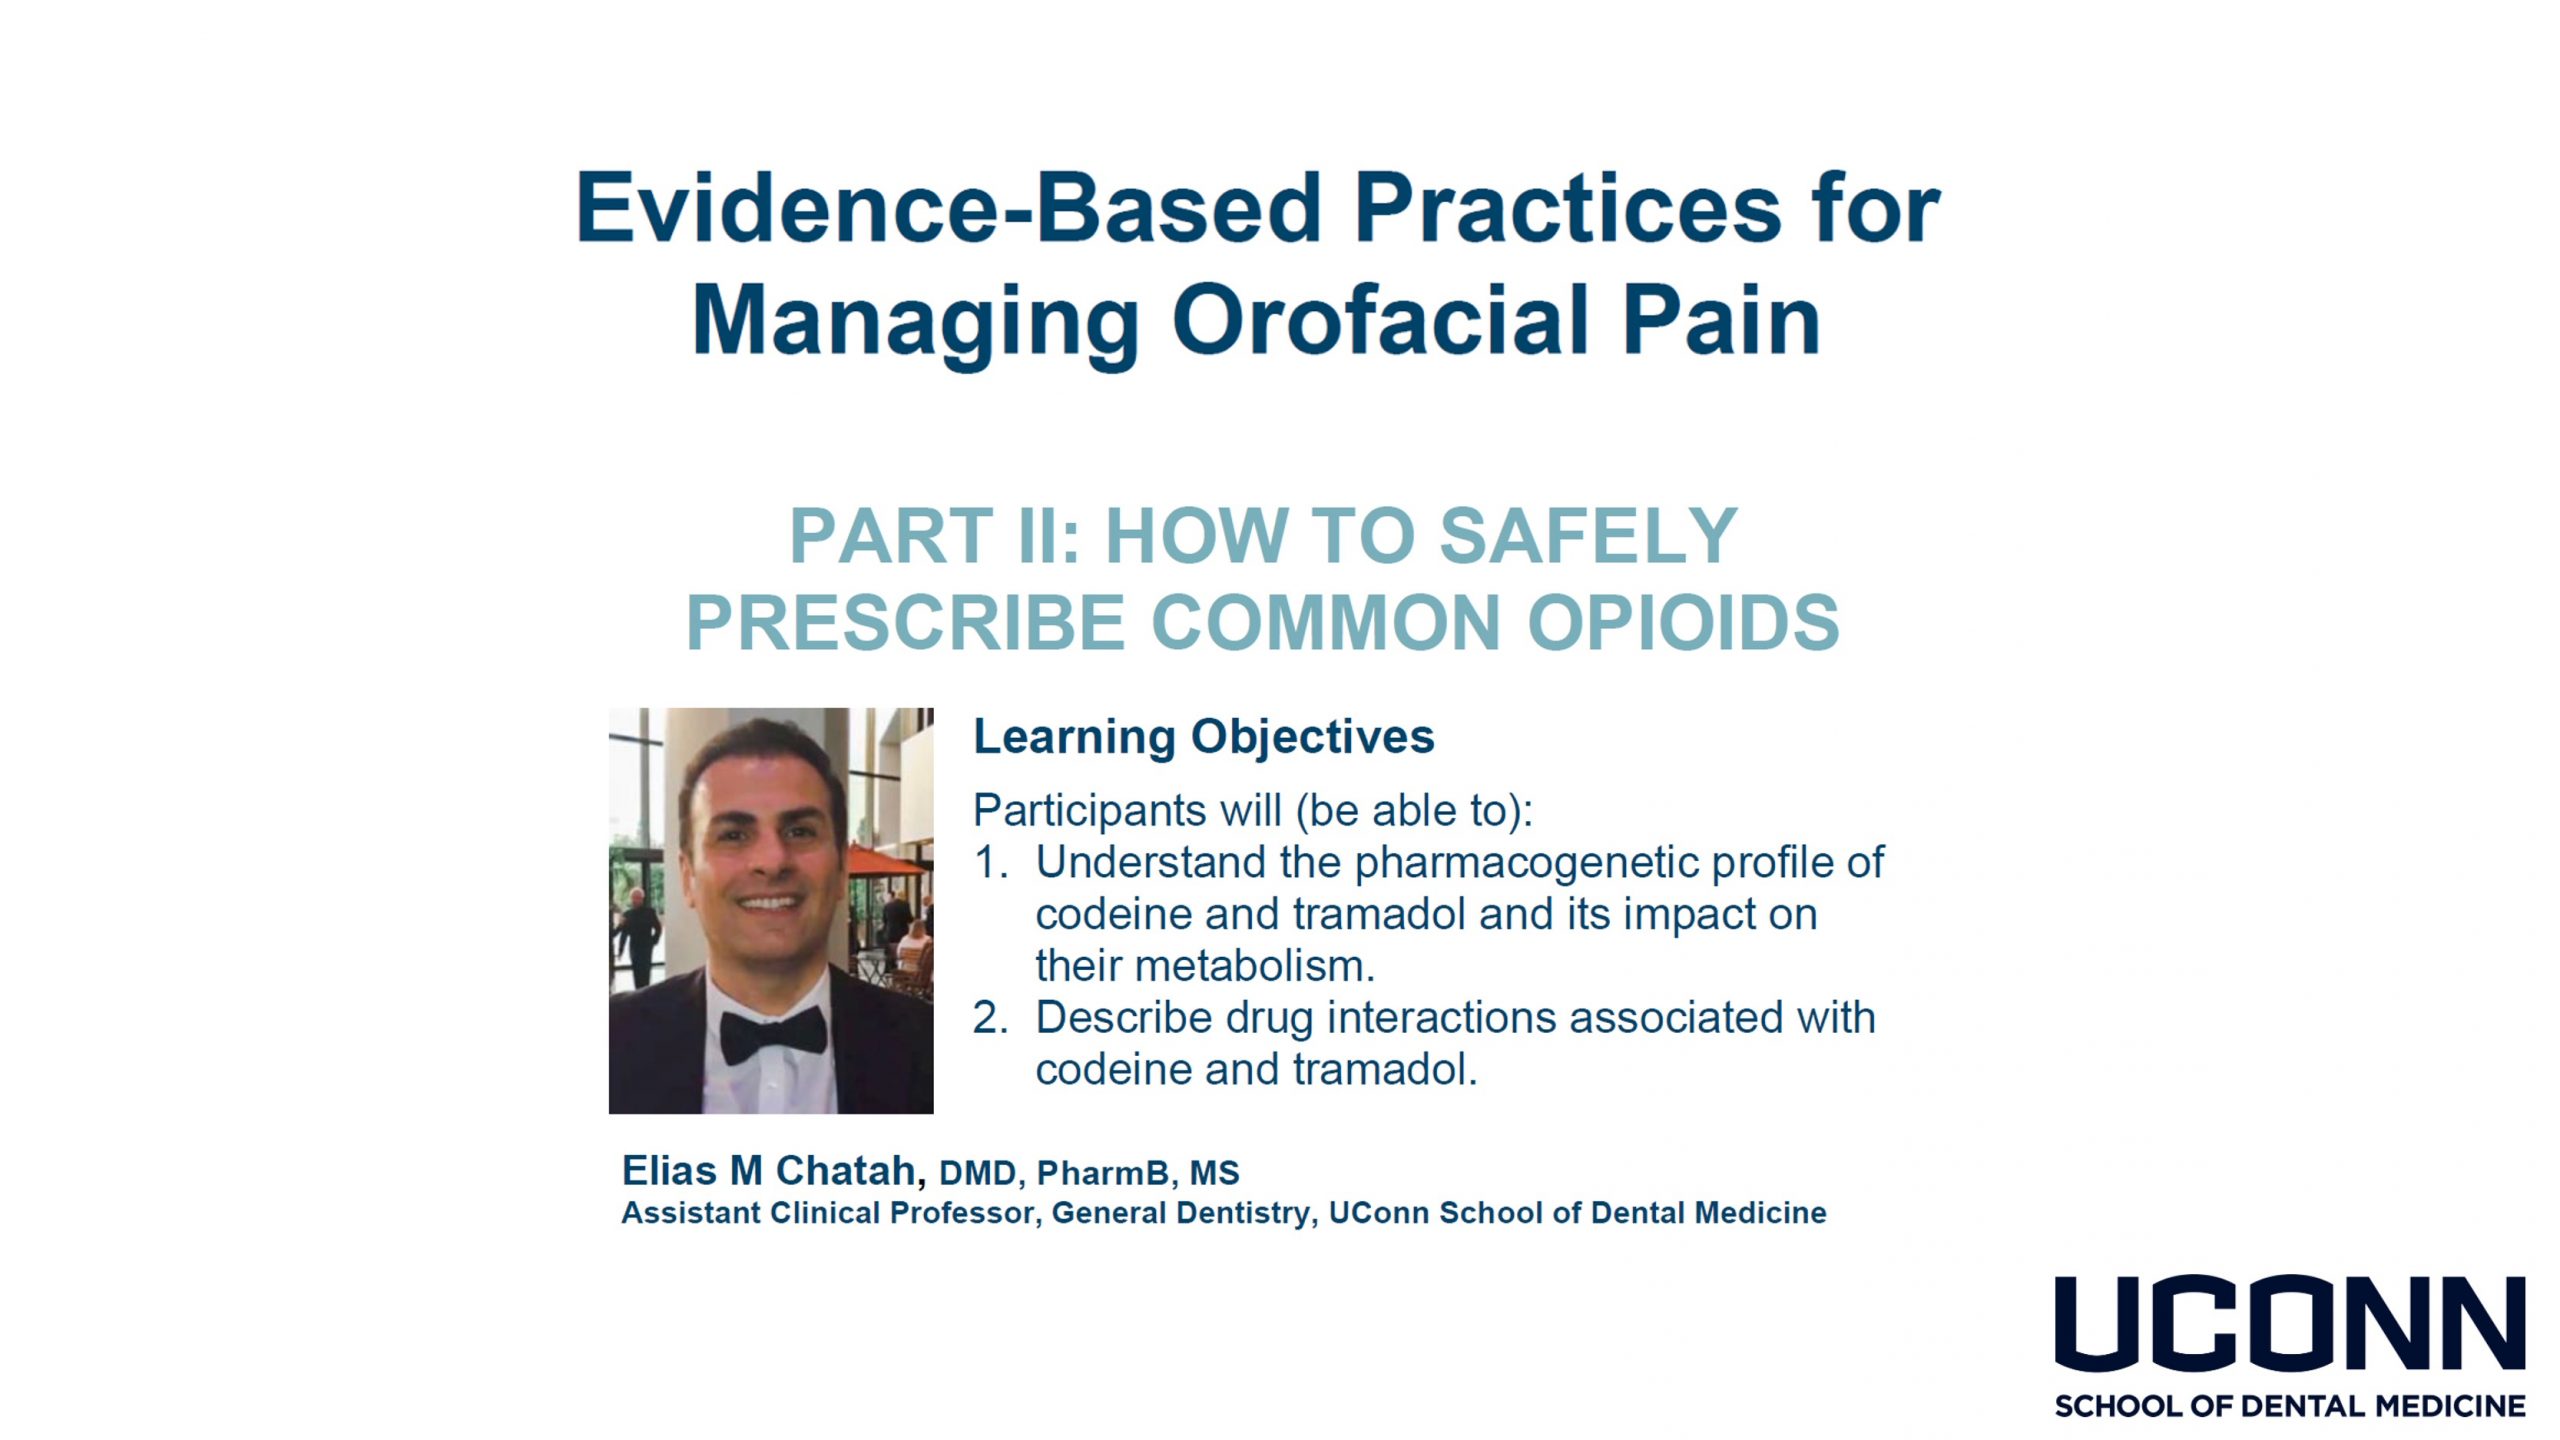 Best Practices for Managing Acute and Chronic Oral and Facial Pain. Part II